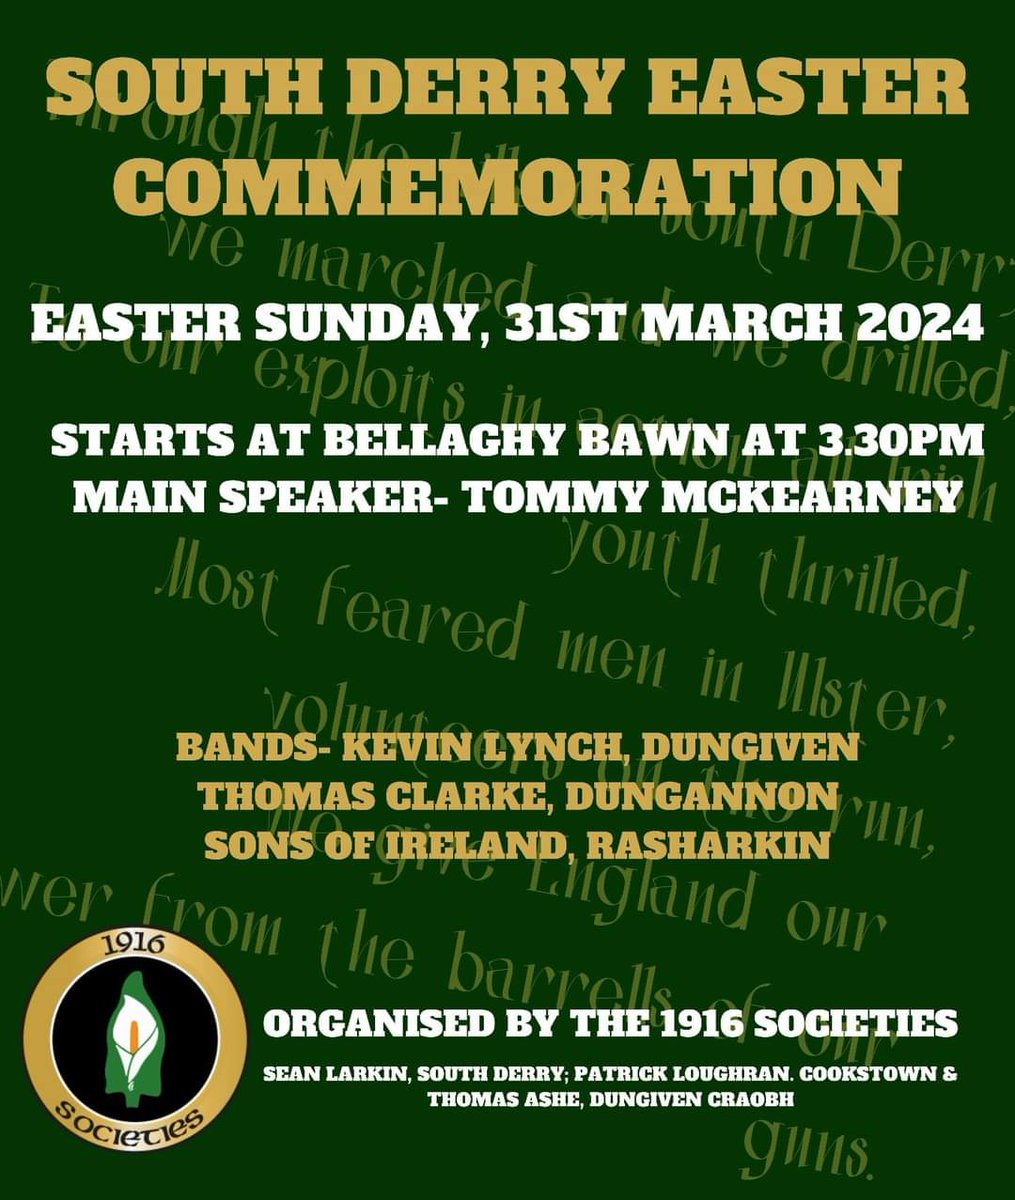 Everyone welcome, Easter Sunday 31st March. Honour Ireland's patriot dead.